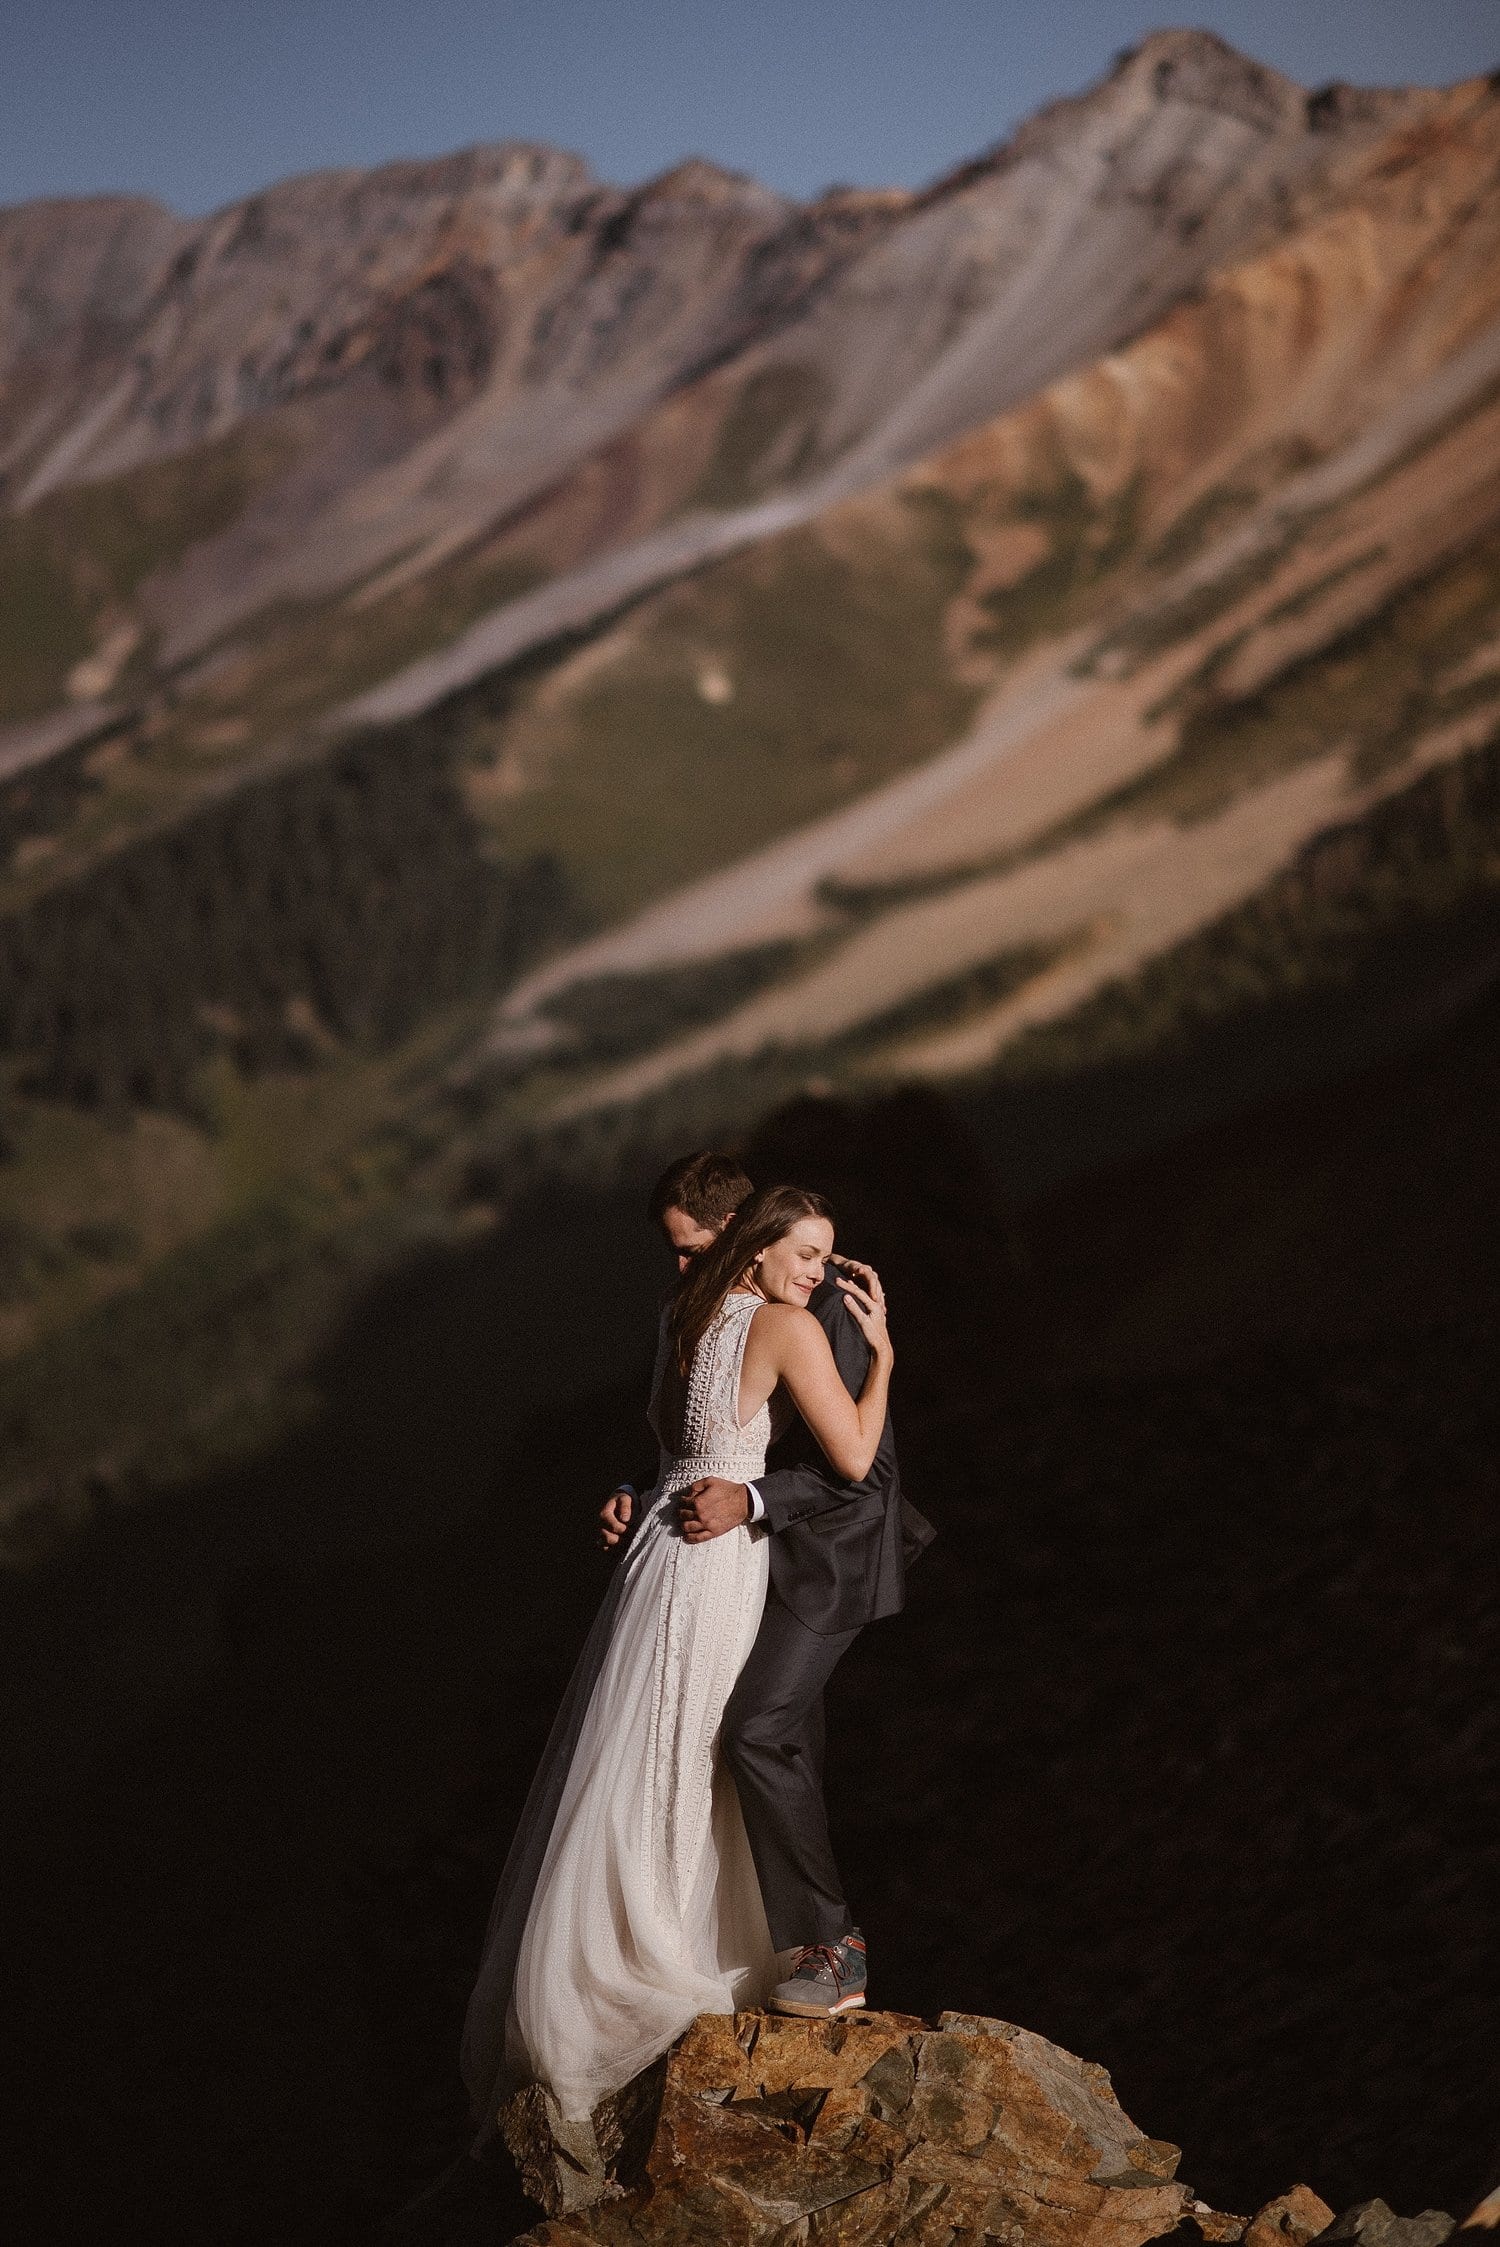 Bride and groom embrace while standing on a rock. There are mountains in the background. 